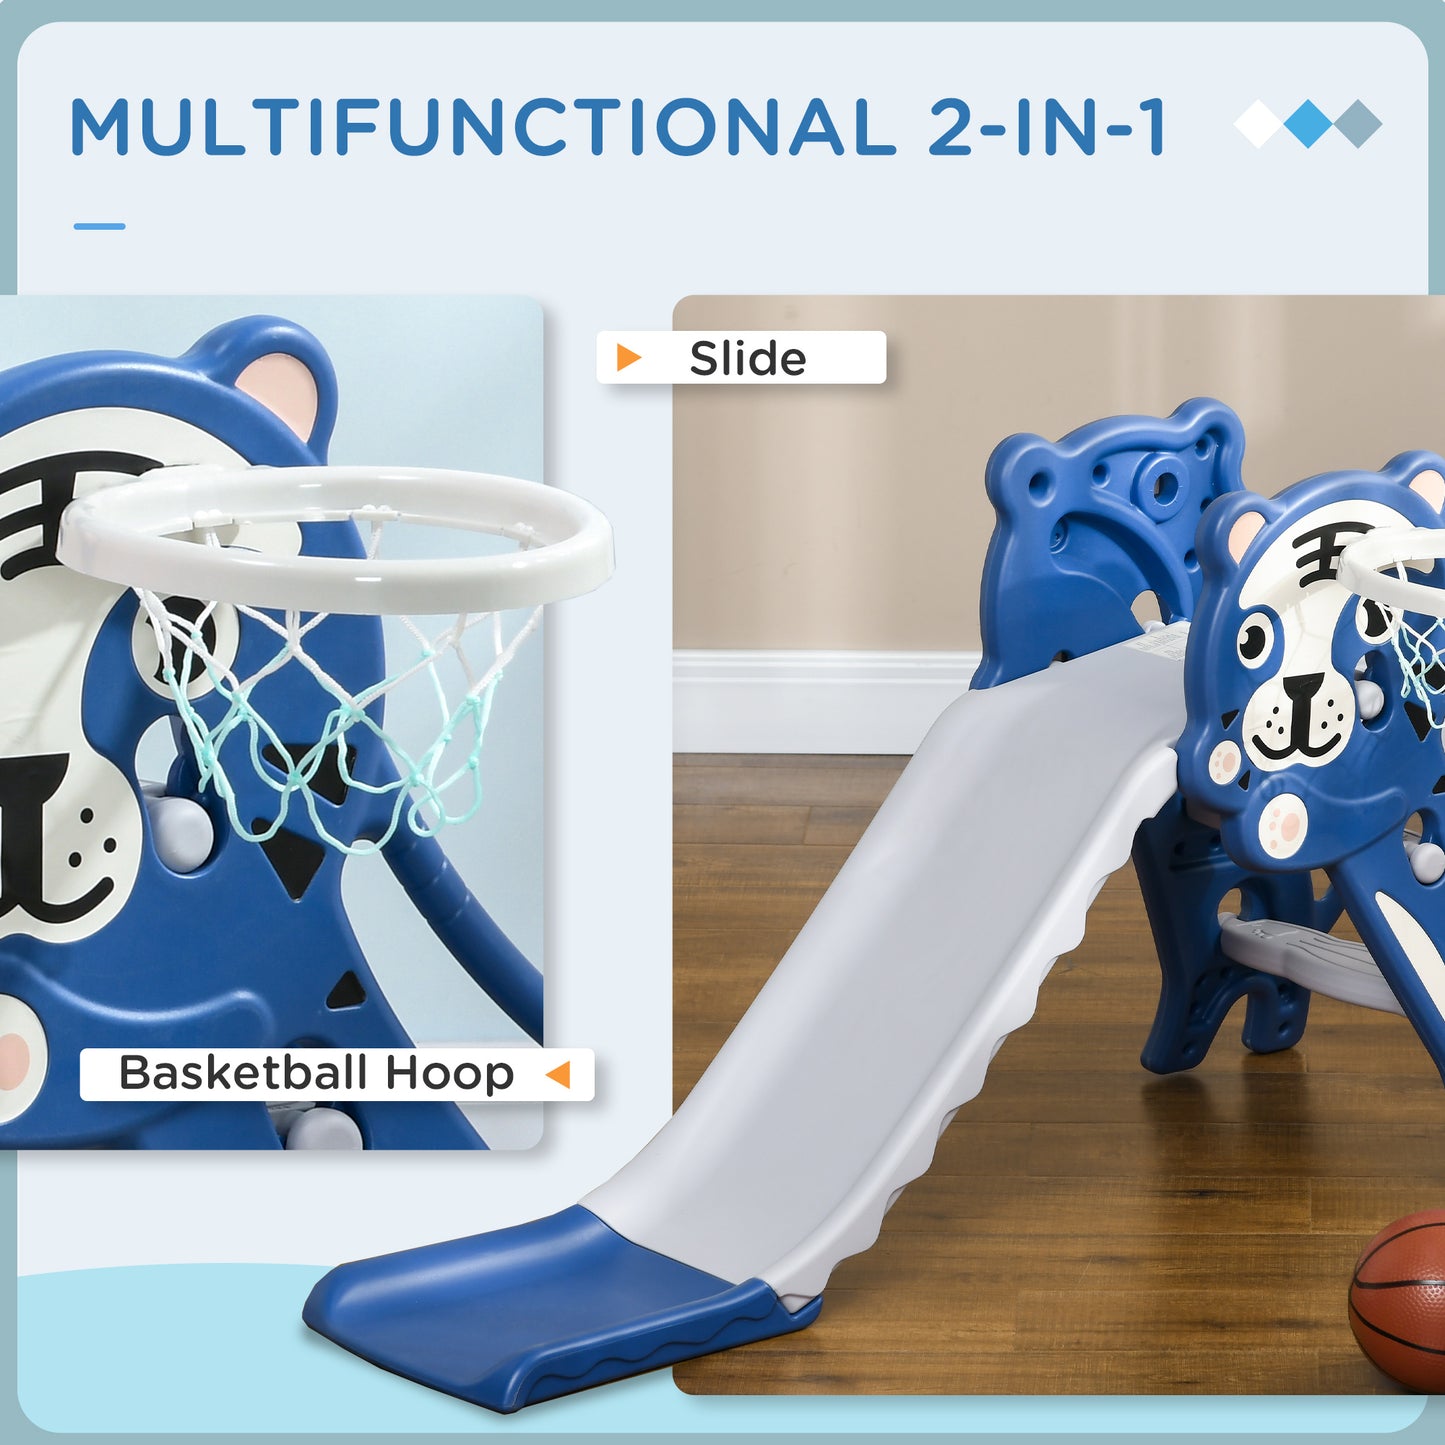 AIYAPLAY 2 in 1 Baby Slide for Indoor Use with Basketball Hoop Basketball for Ages 1836 Months Blue